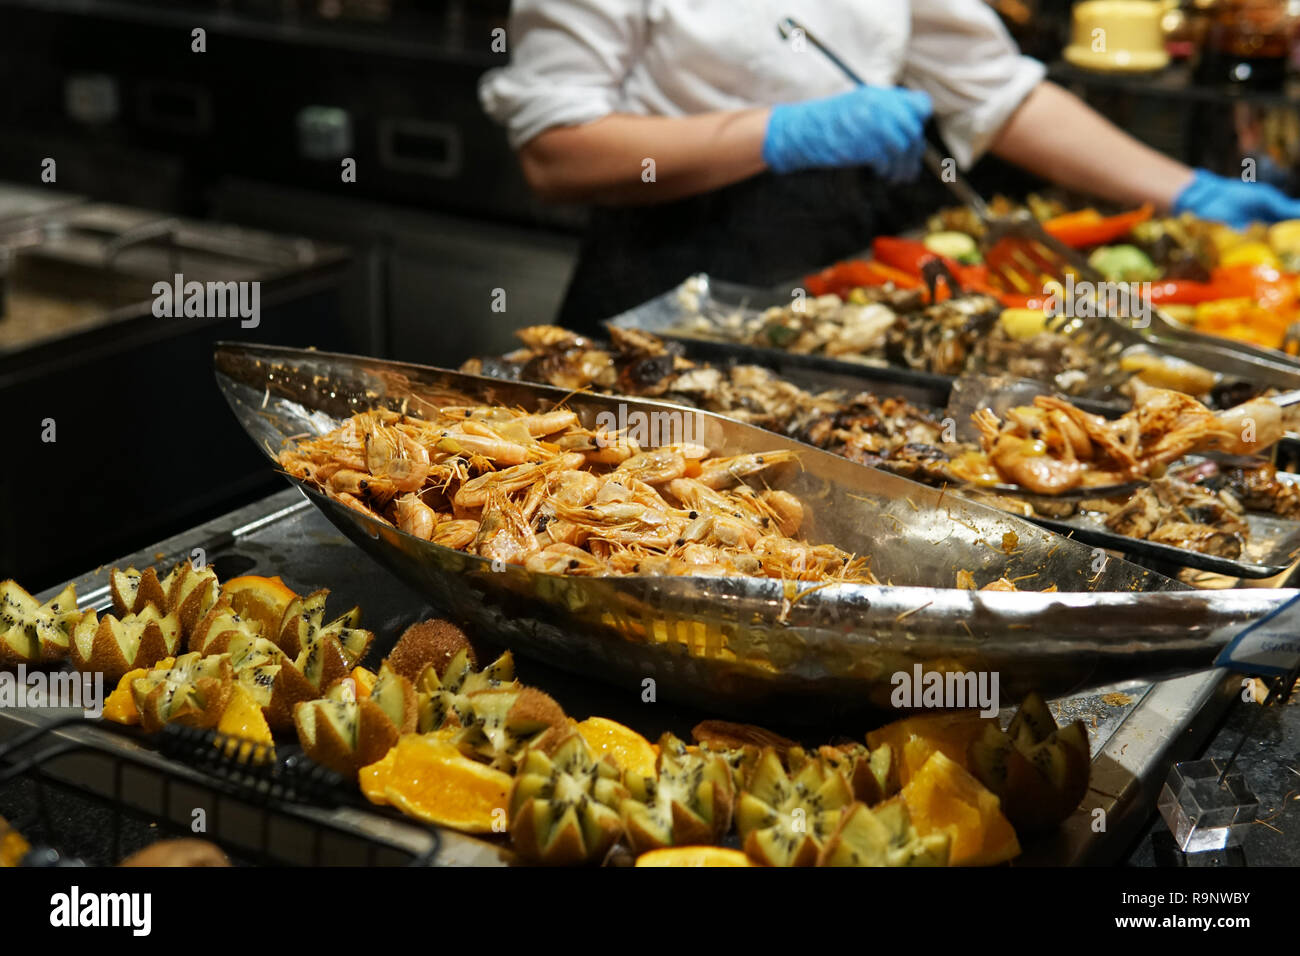 Fried and baked food delicious cuisine food Stock Photo